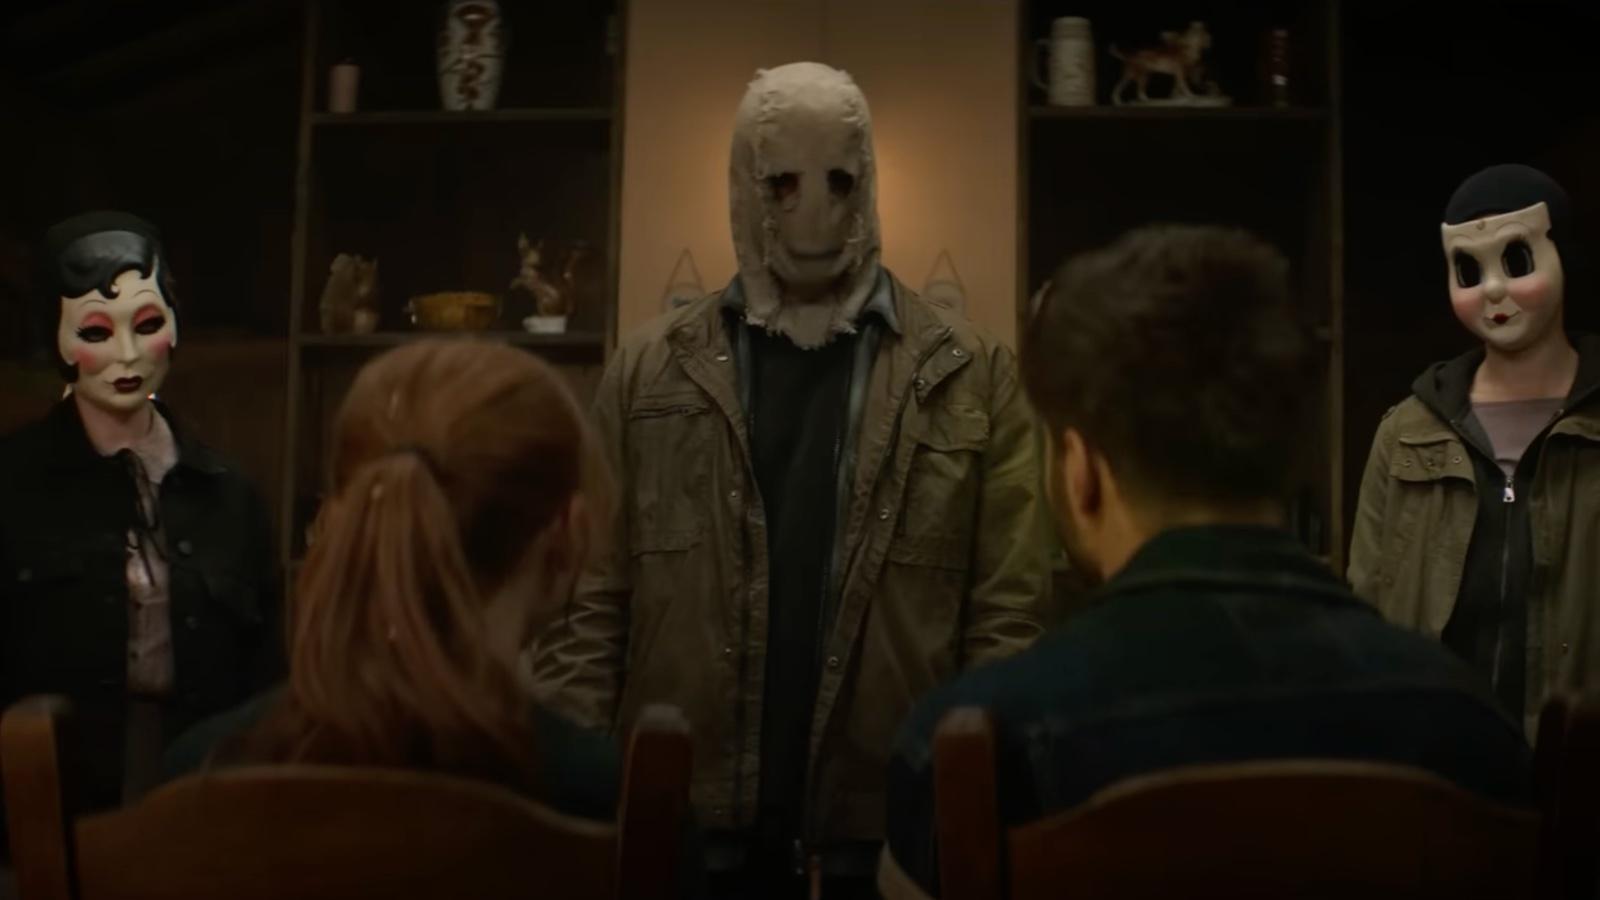 The Strangers Chapter 1 killers in trailer.